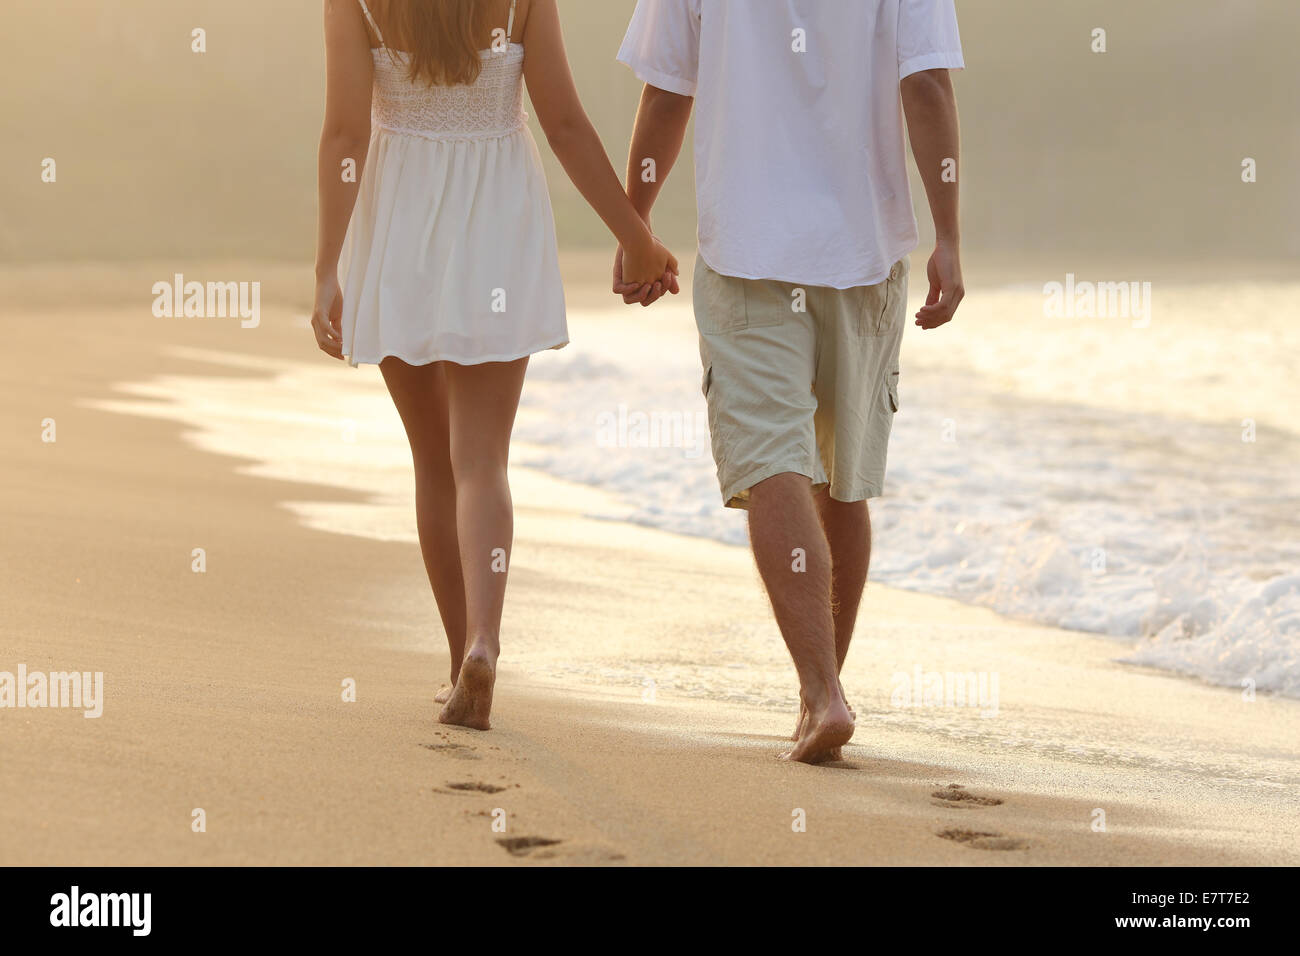 Back view of a couple taking a walk holding hands on the beach at sunrise Stock Photo